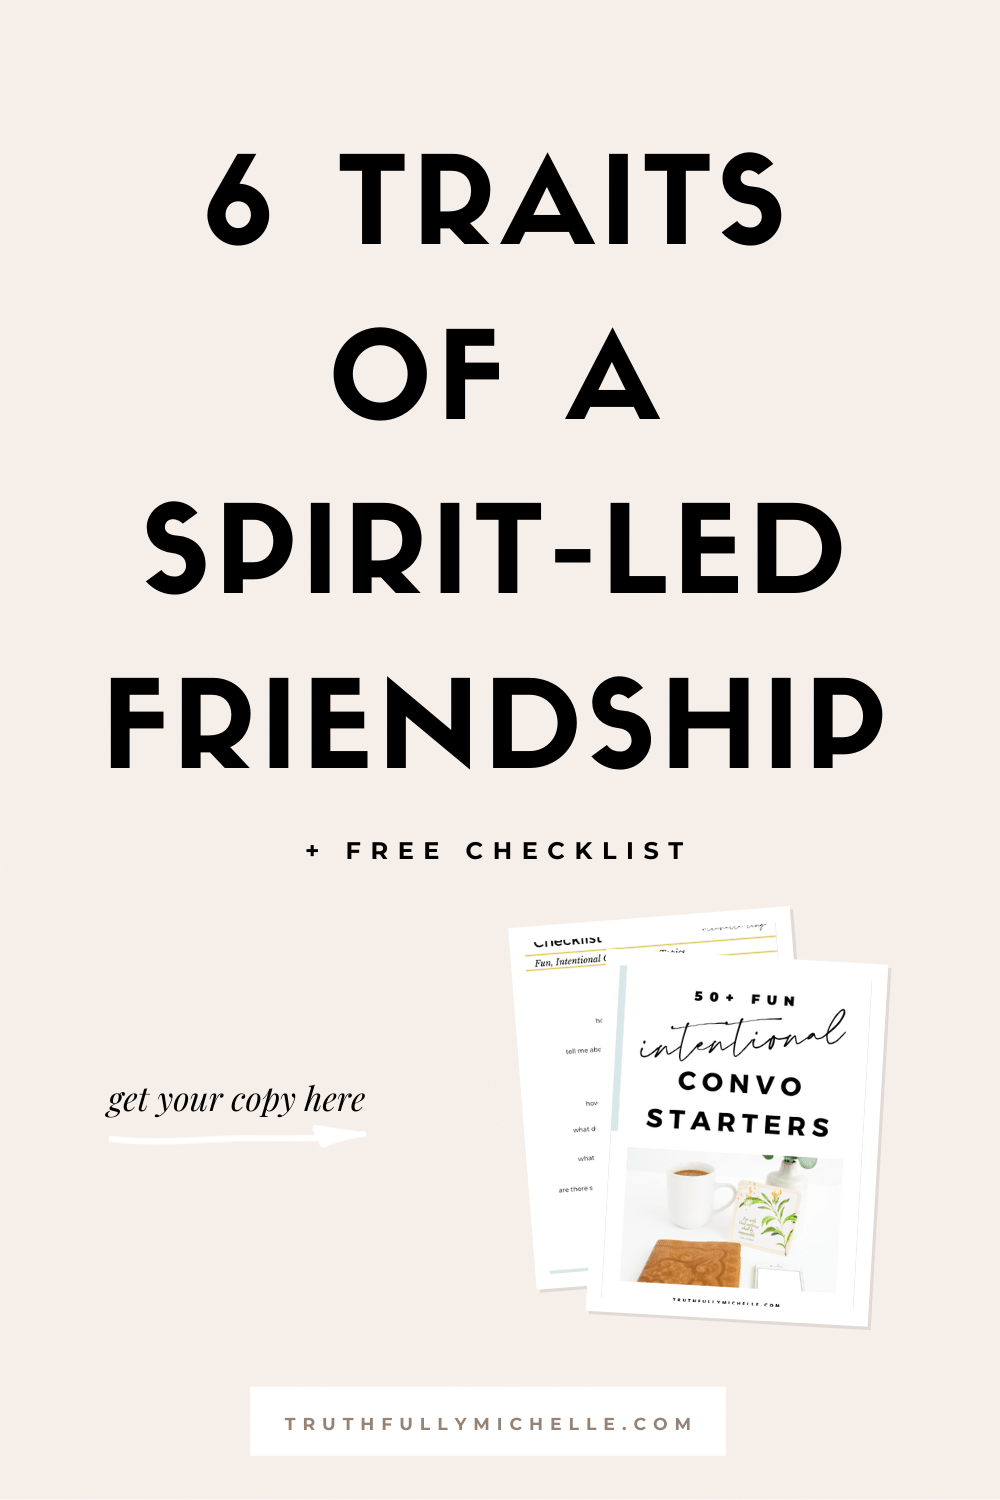 characteristics of a godly friend, how to be a godly friend, what is a godly friend, being a godly friend, building godly friendships, godly friendship woman, christian friendships, christian friends